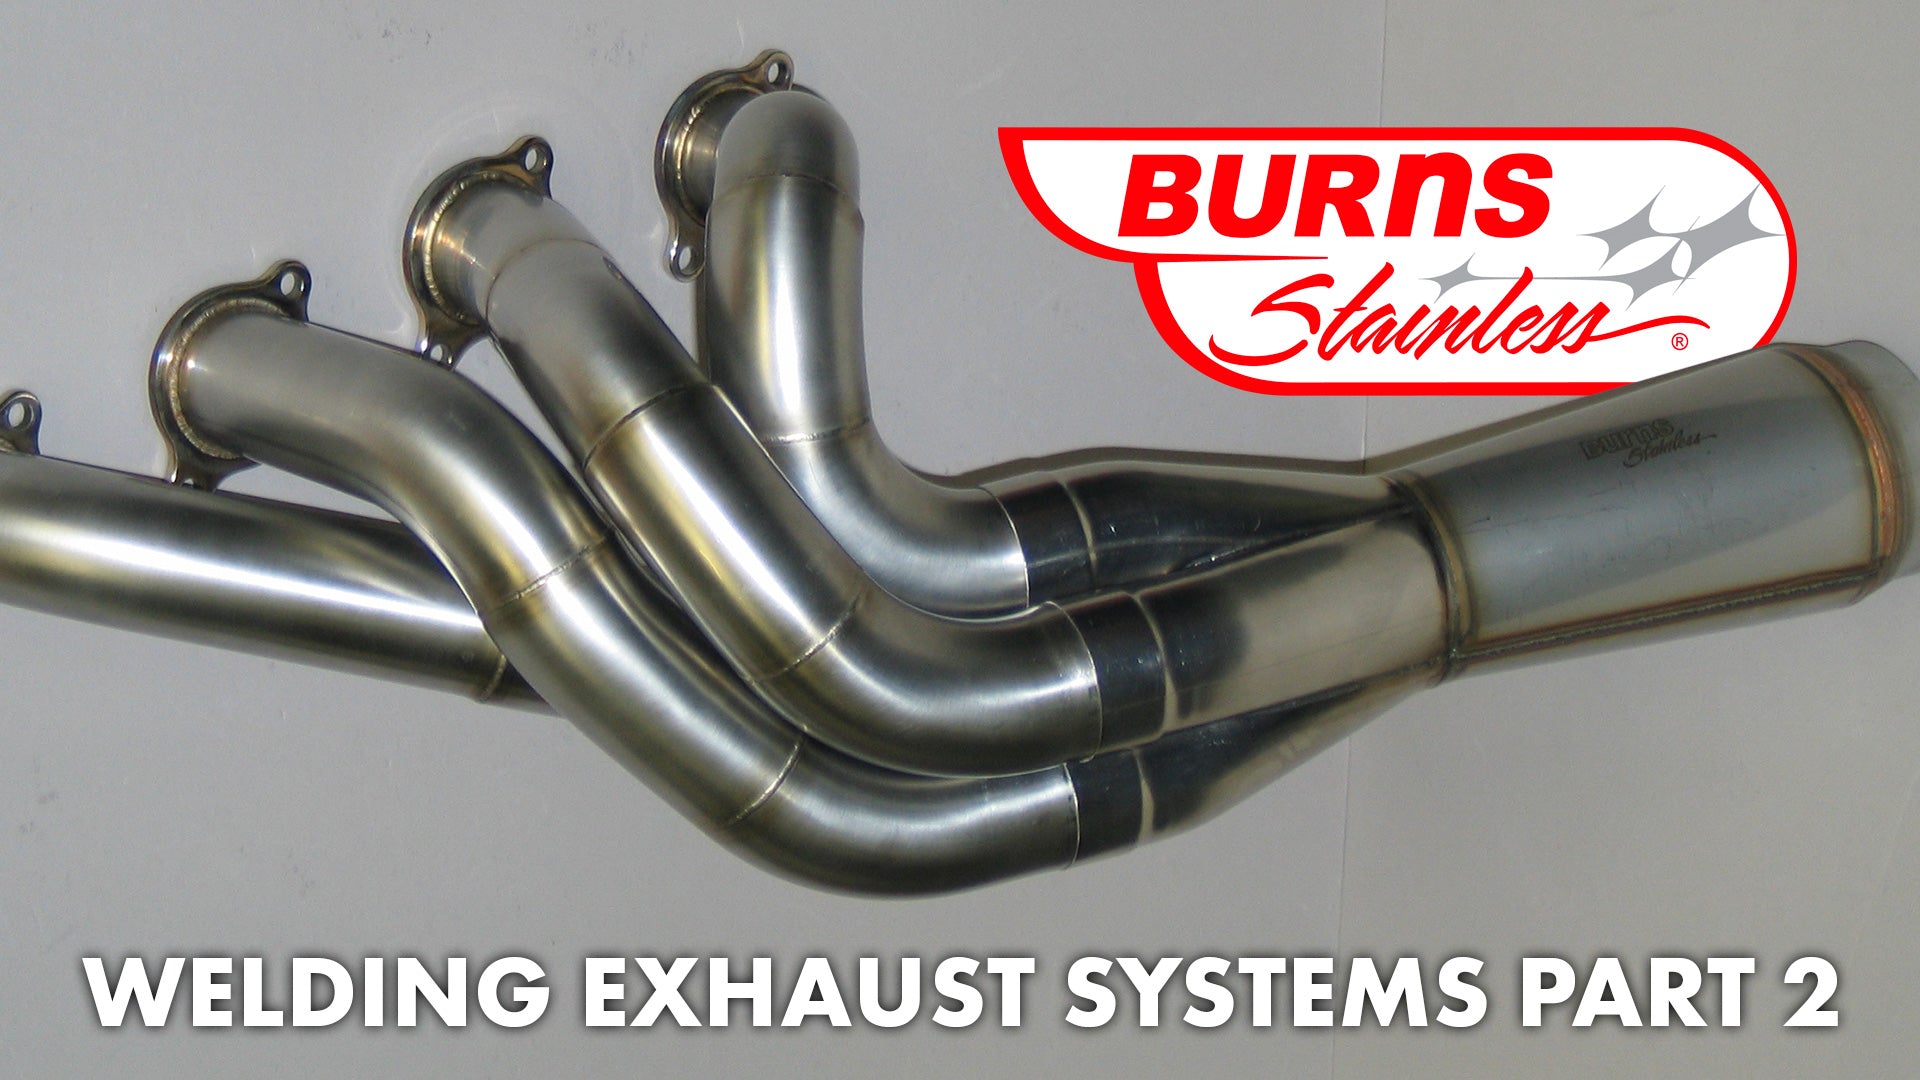 3 Ways to Connect Exhaust Pipes Without Welding 